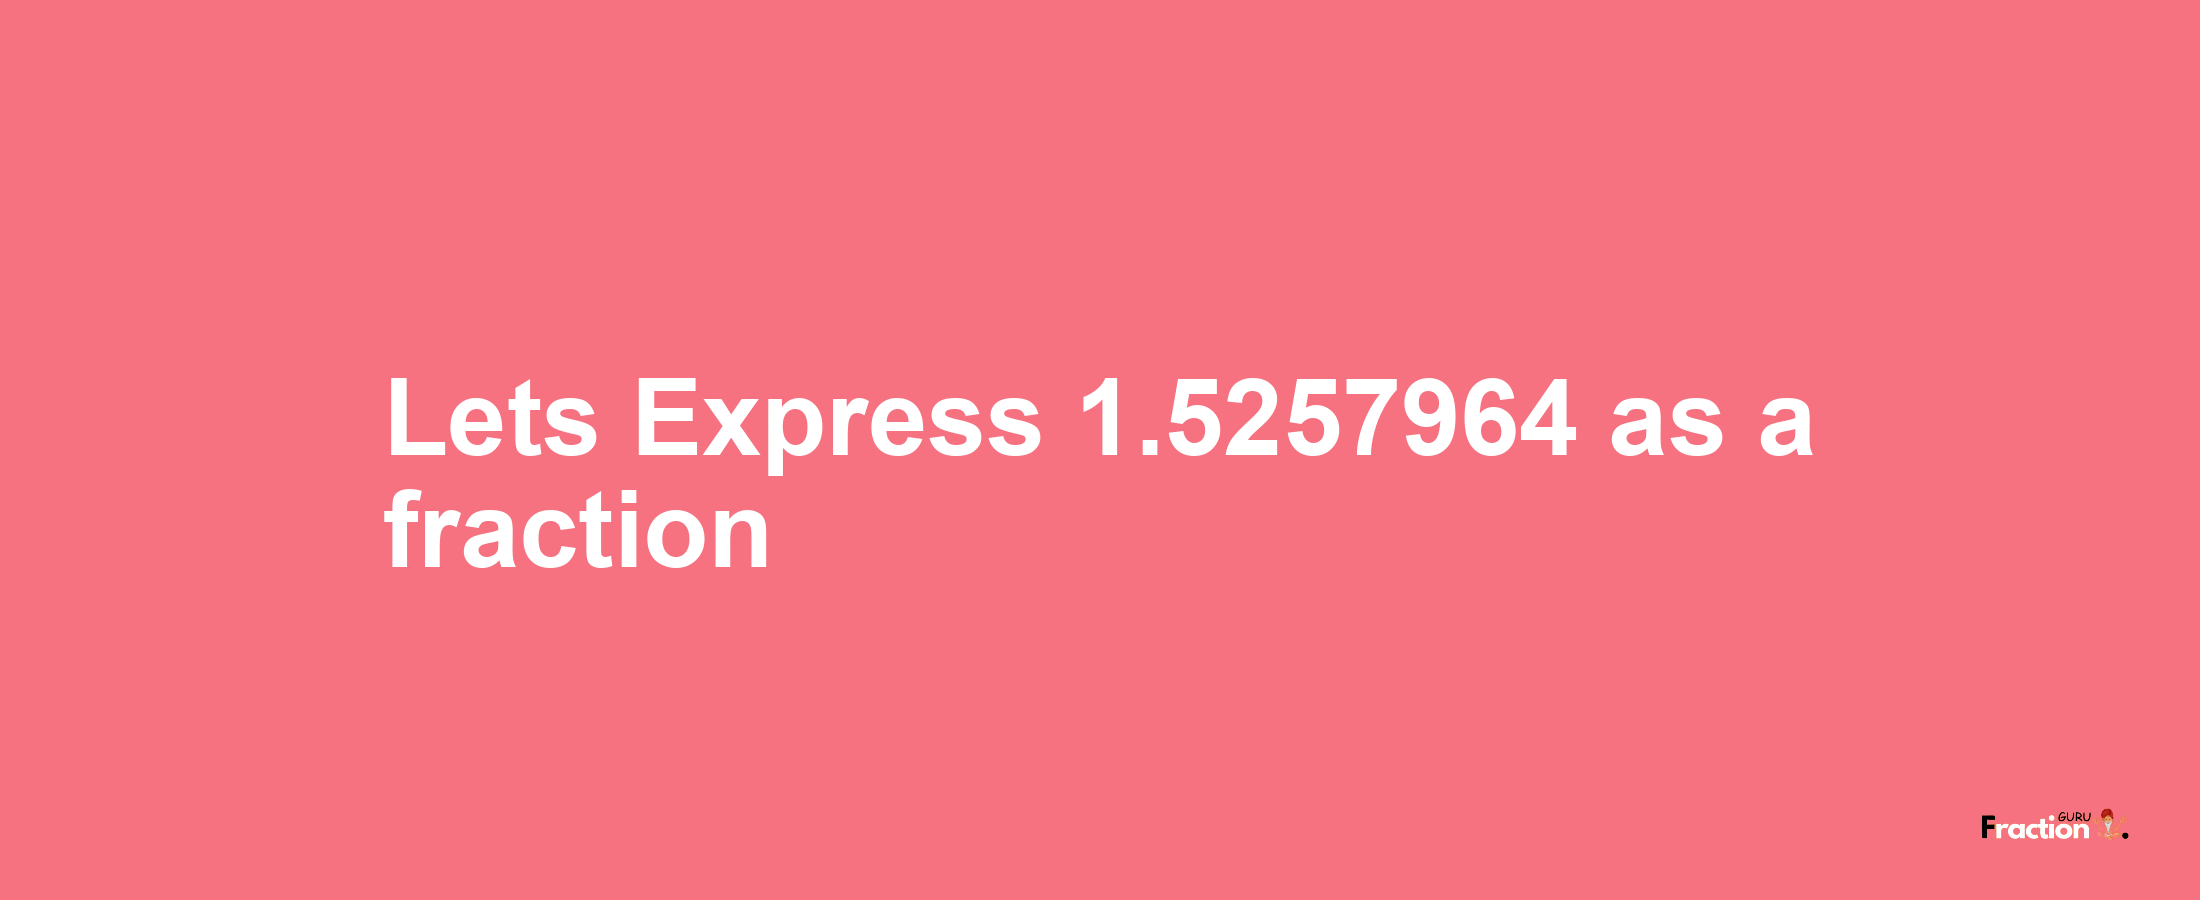 Lets Express 1.5257964 as afraction